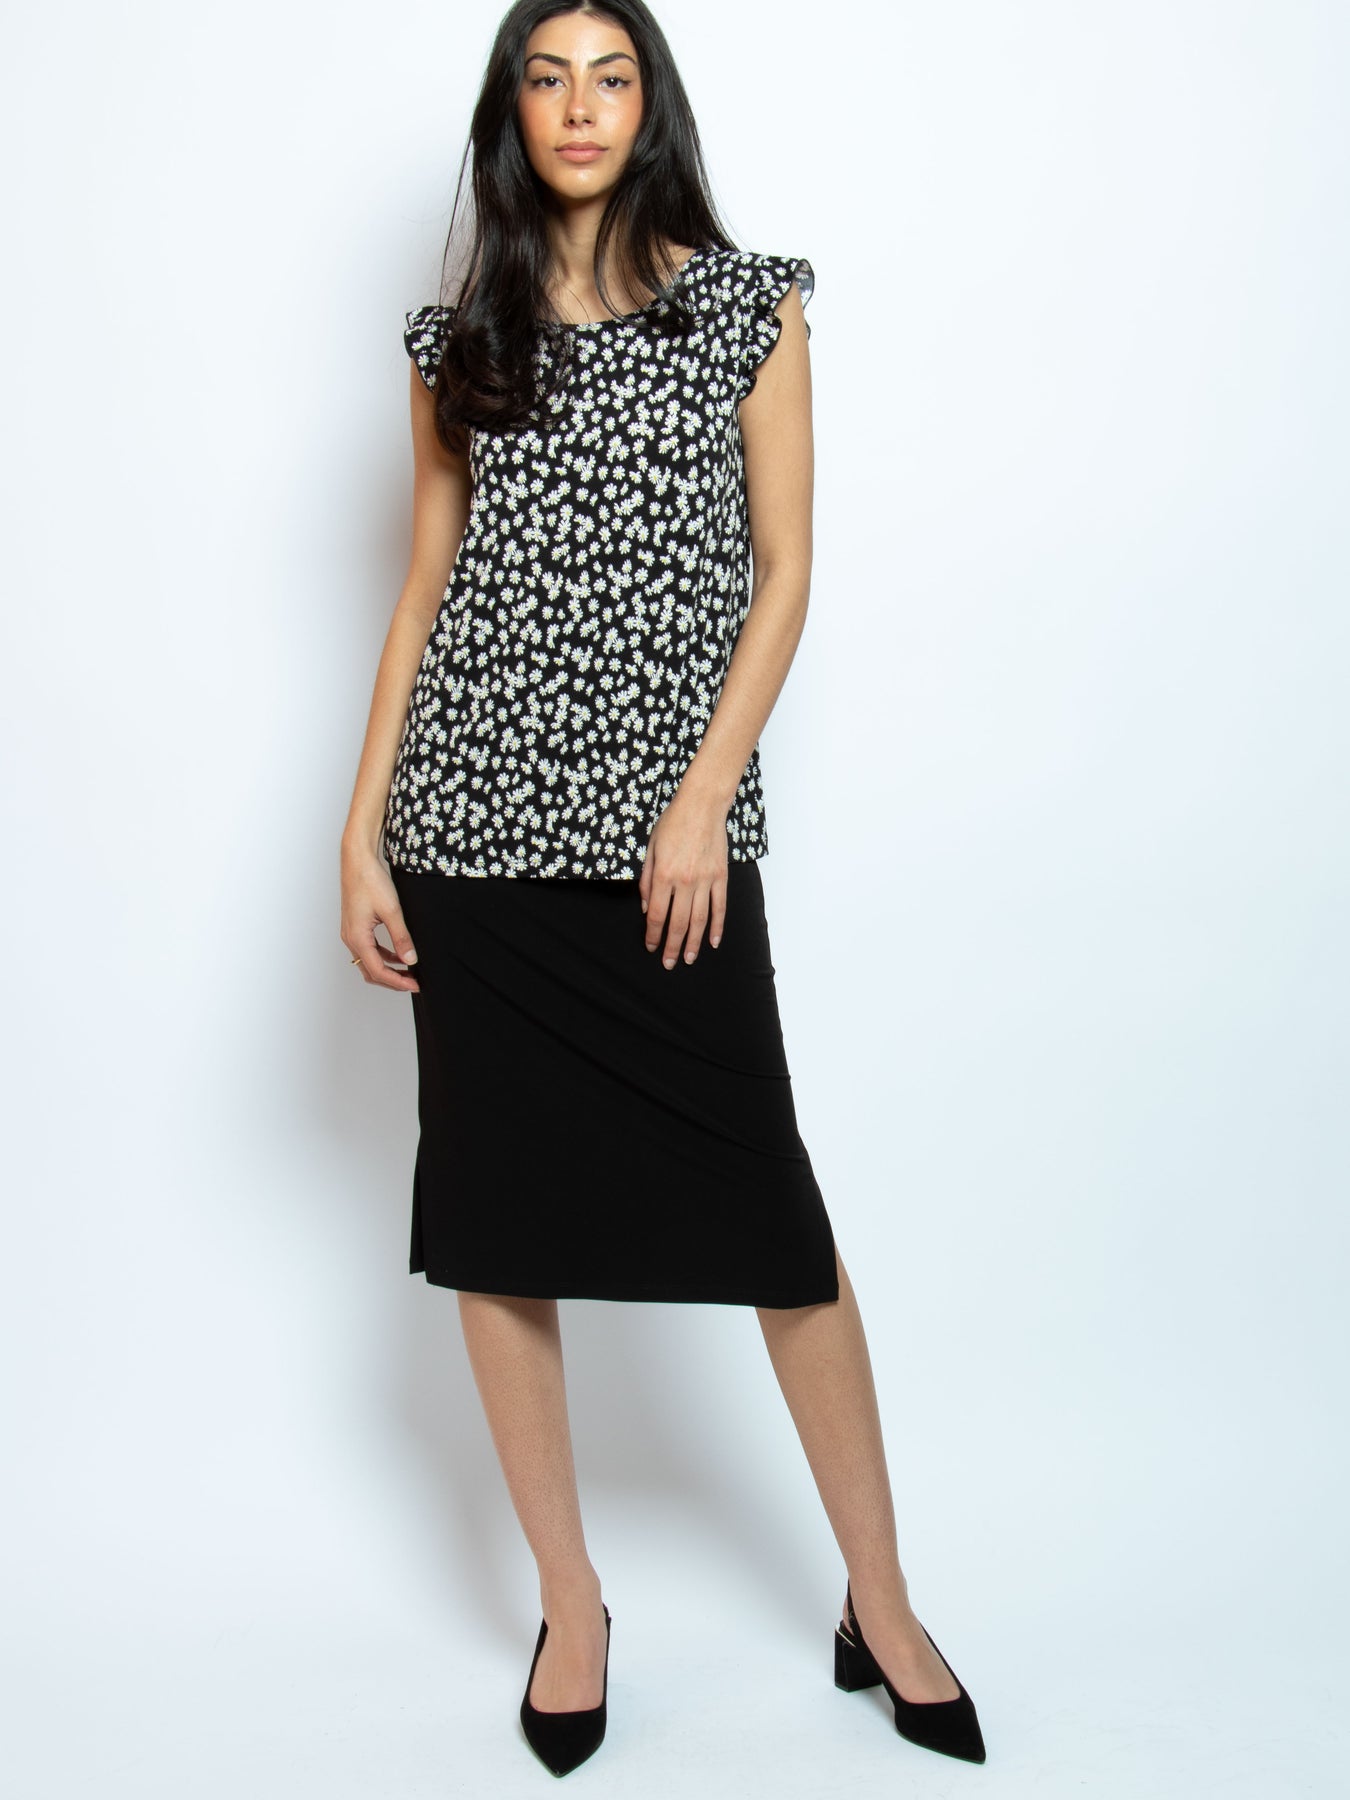 Kim & Co. Women's clothing and accessories made in Canada